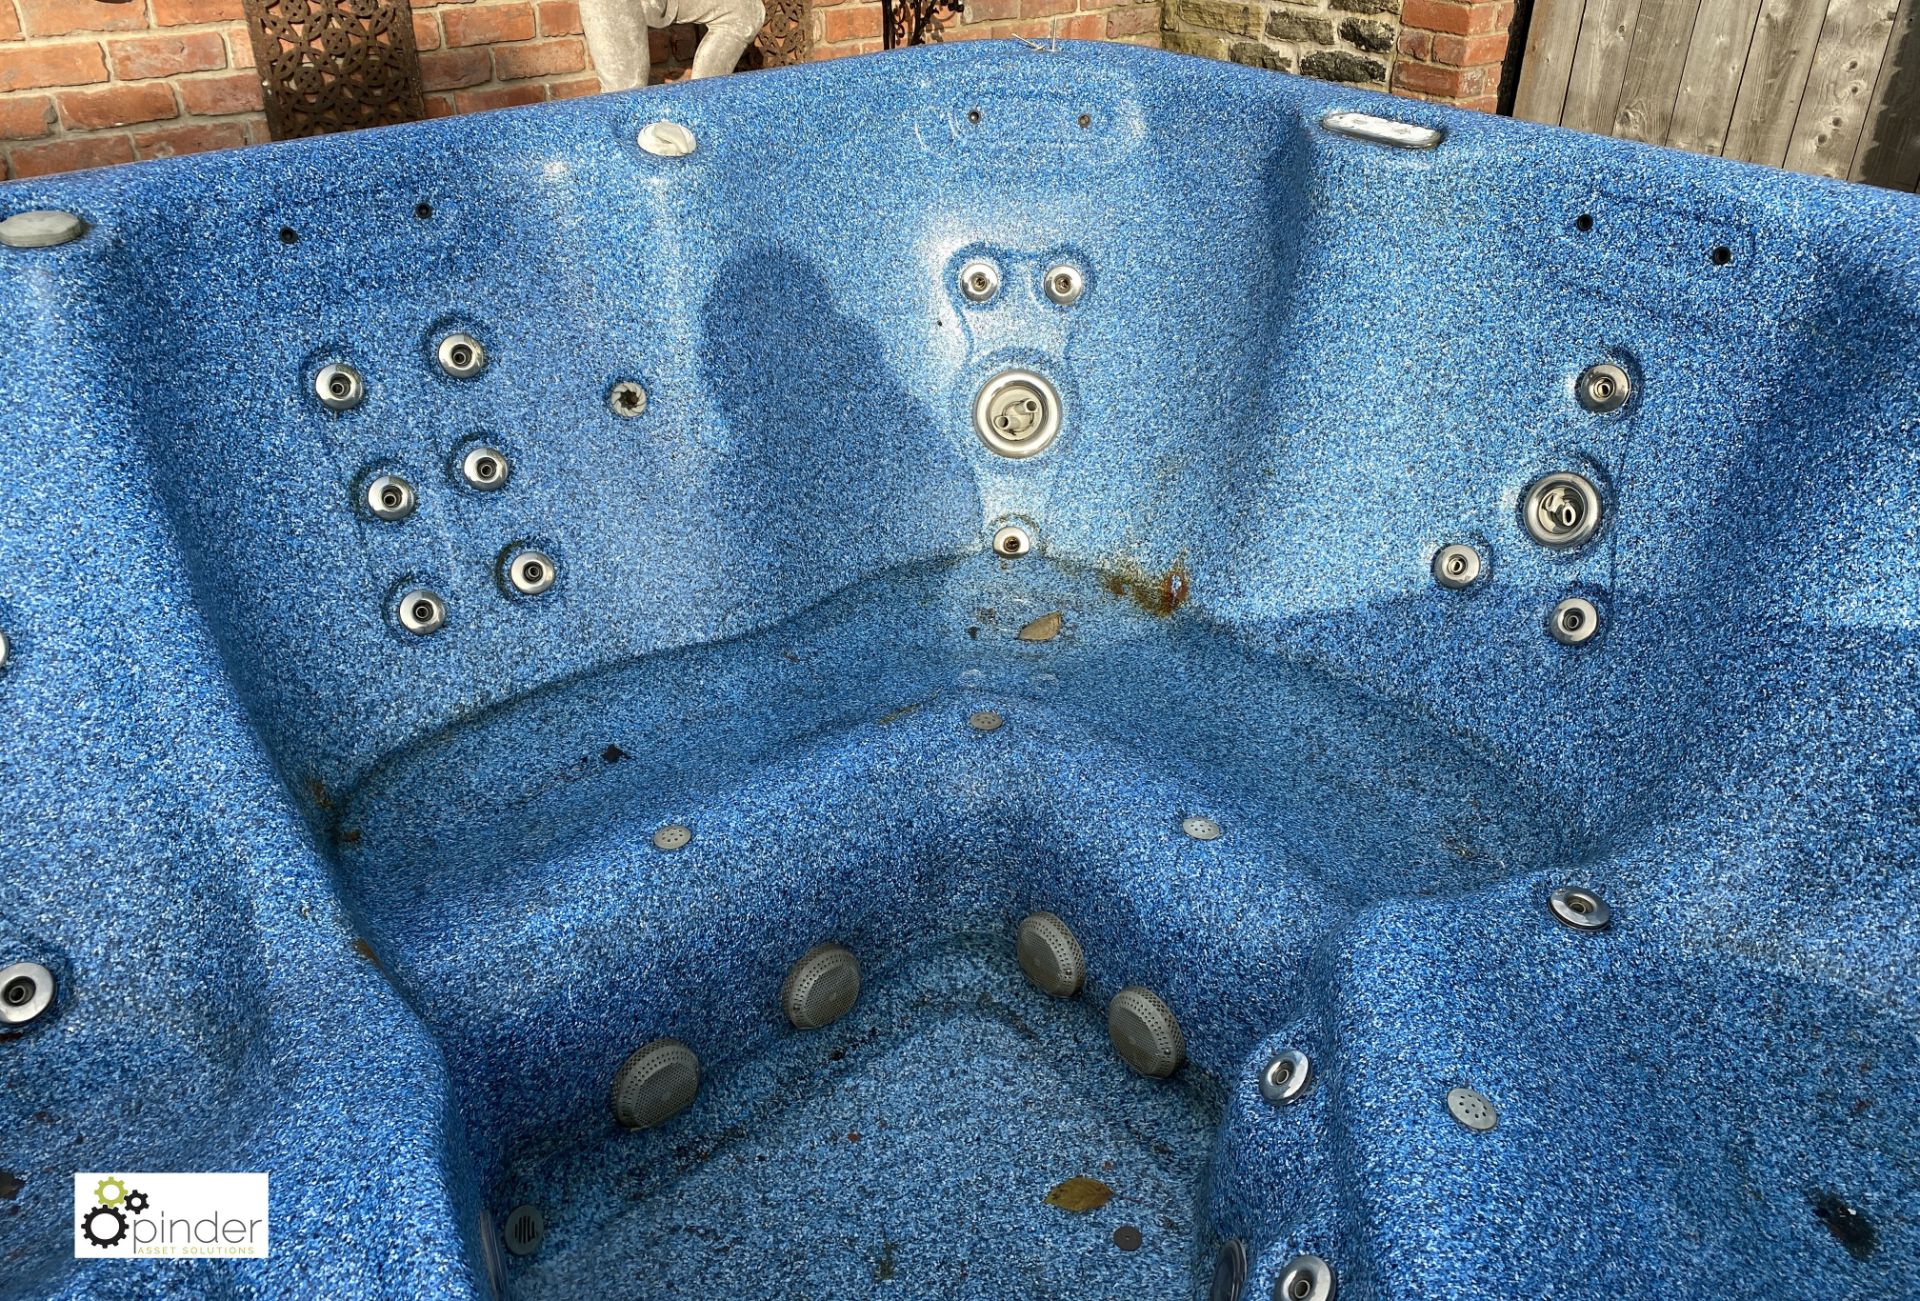 2 Spaform 6-person Hot Tubs/Spas - Image 11 of 15